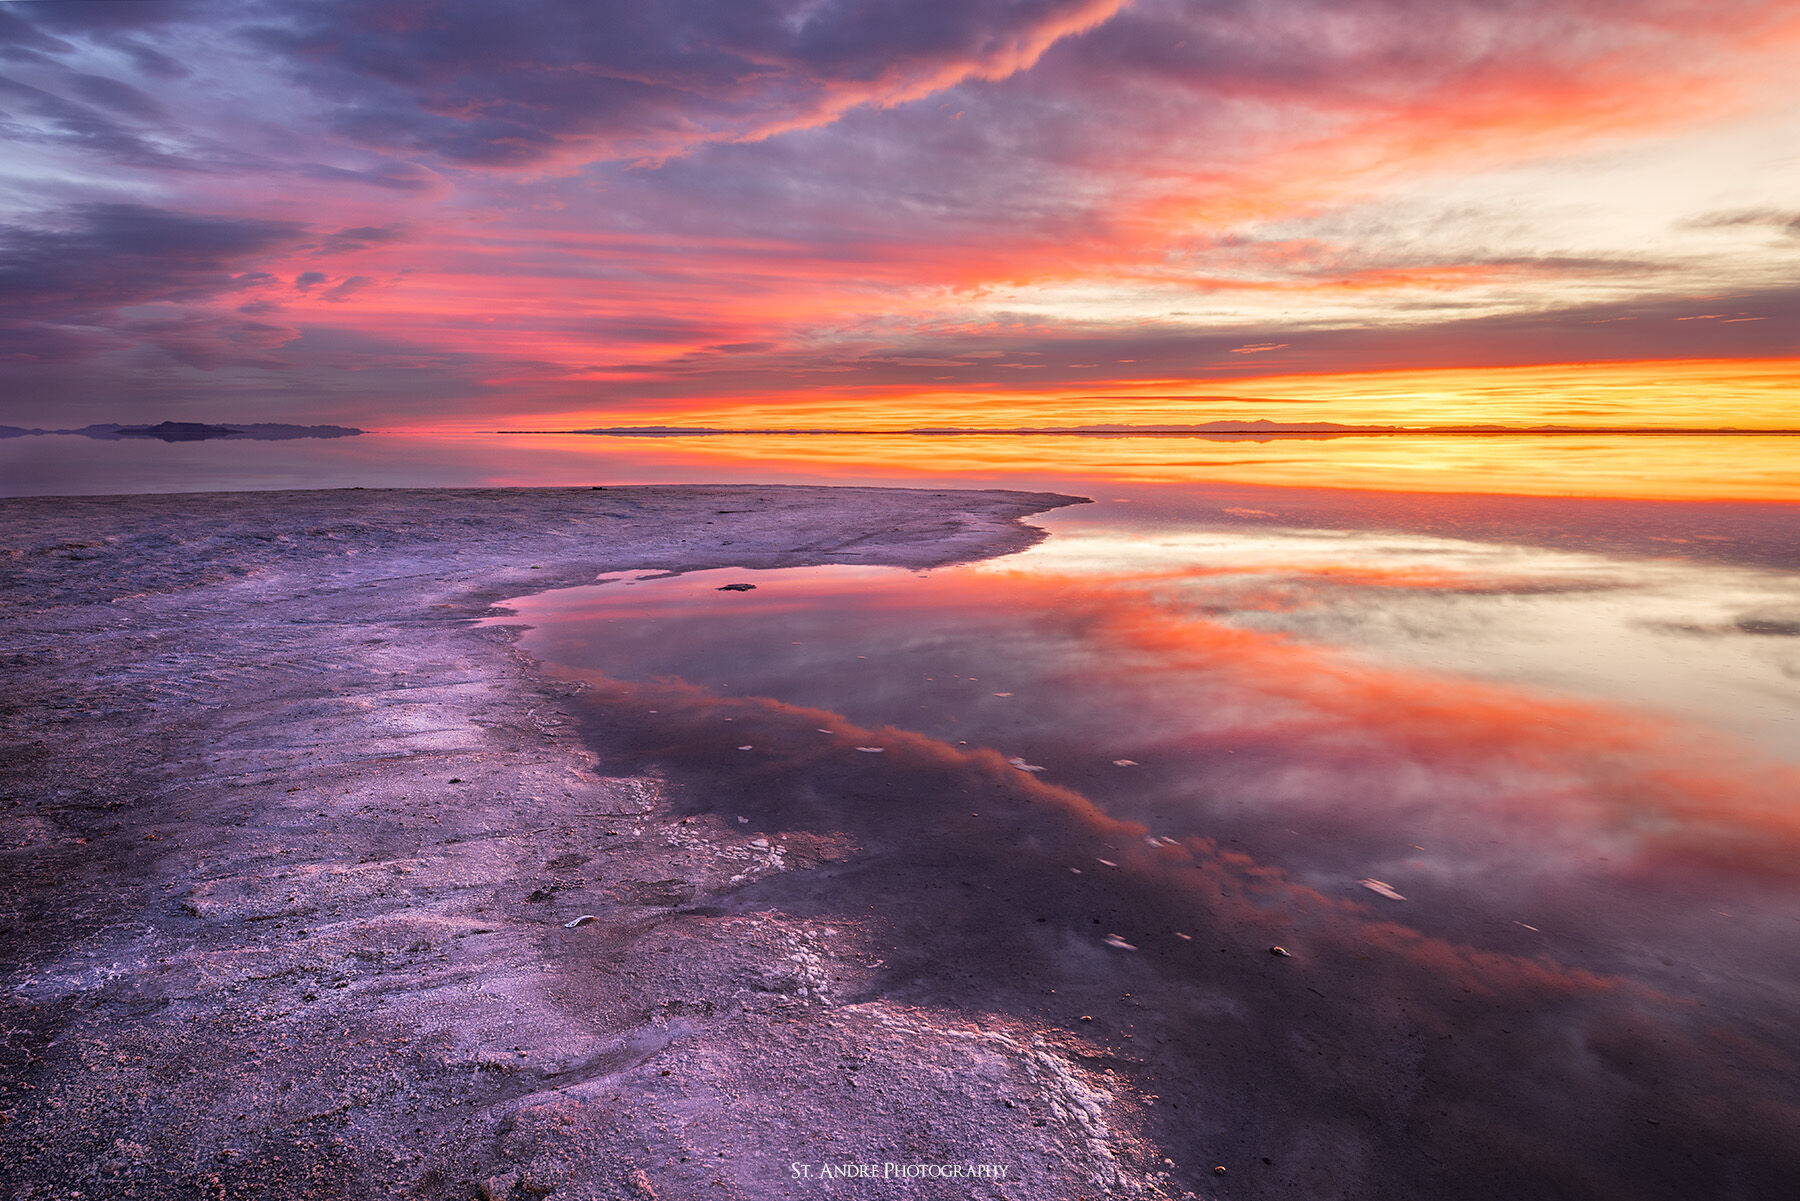 A dramatically colorful sunrise at the salt flats of western Utah